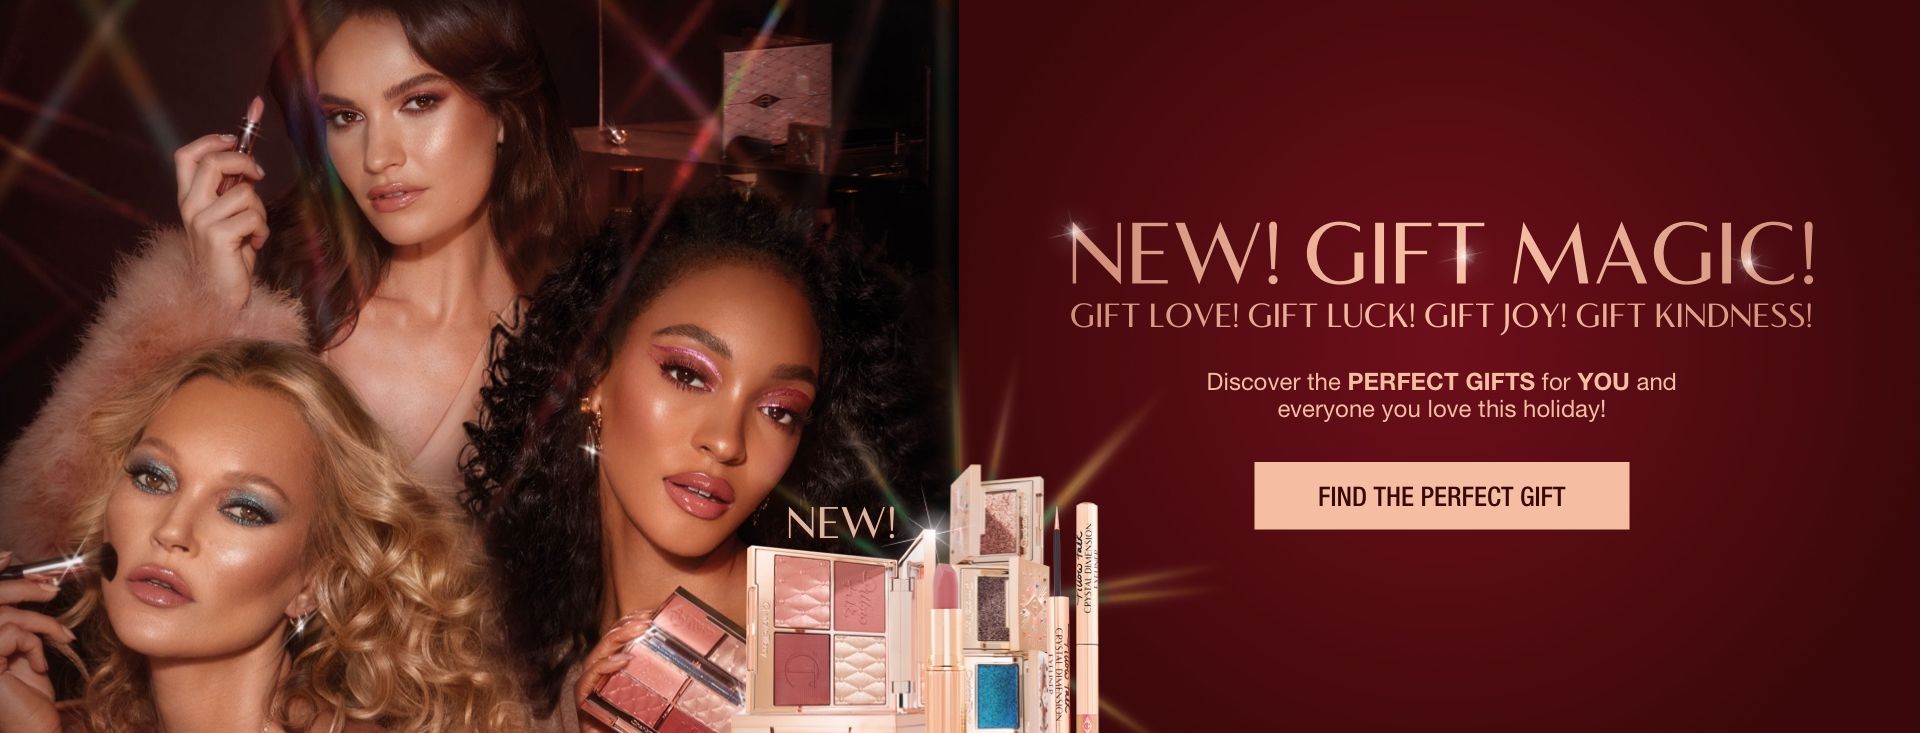 NEW! Gift Magic Holiday Collection